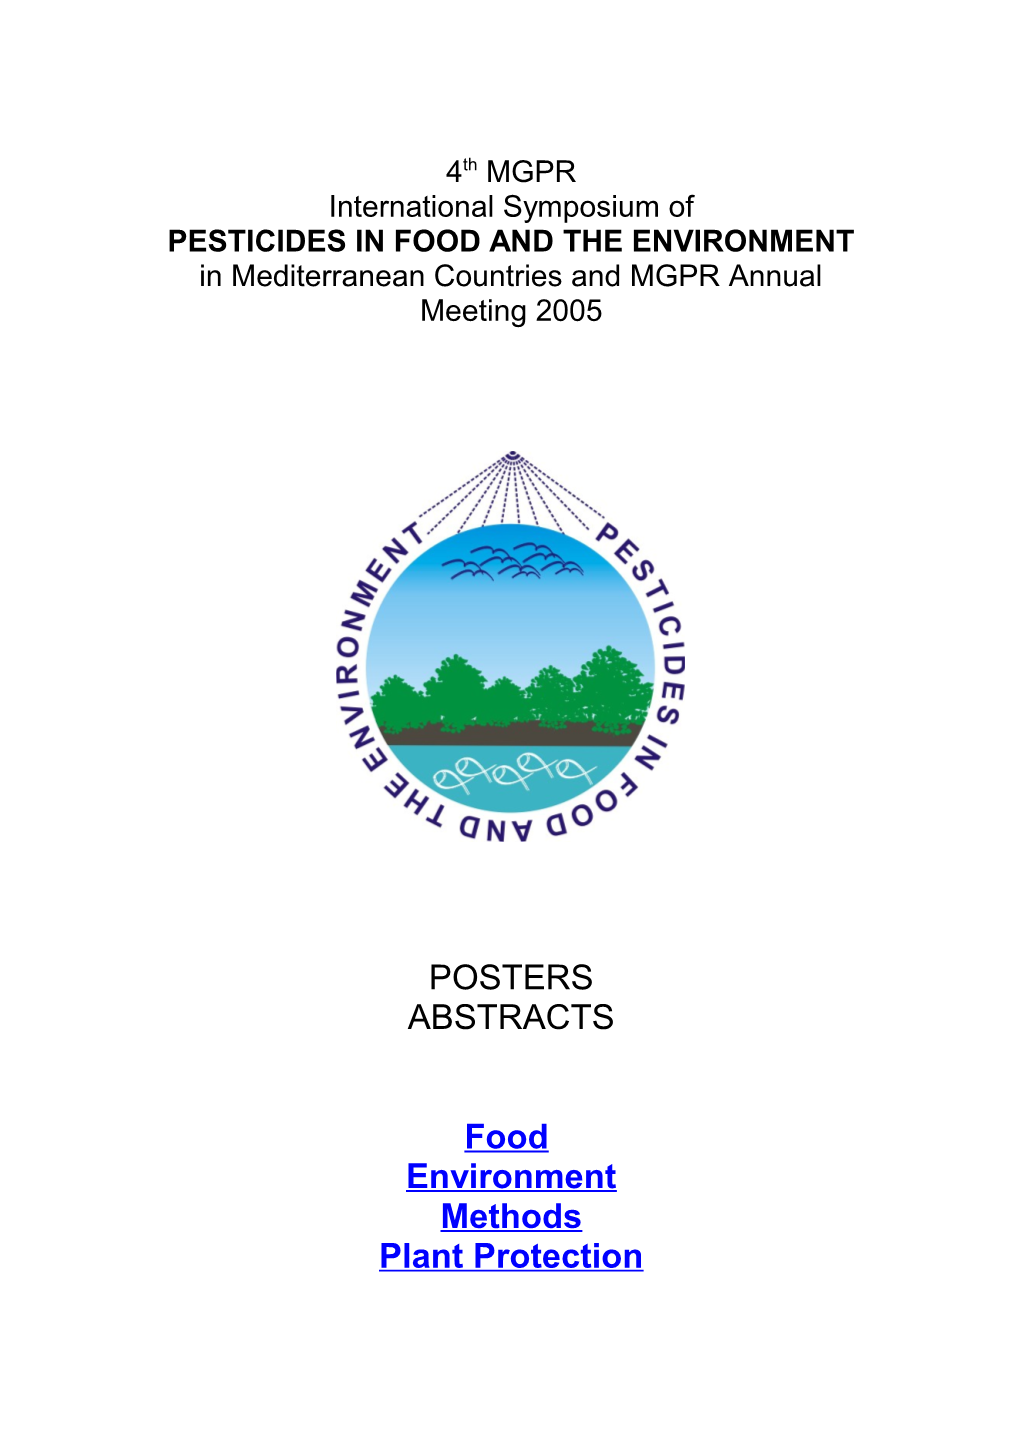 Pesticides in Food and the Environment